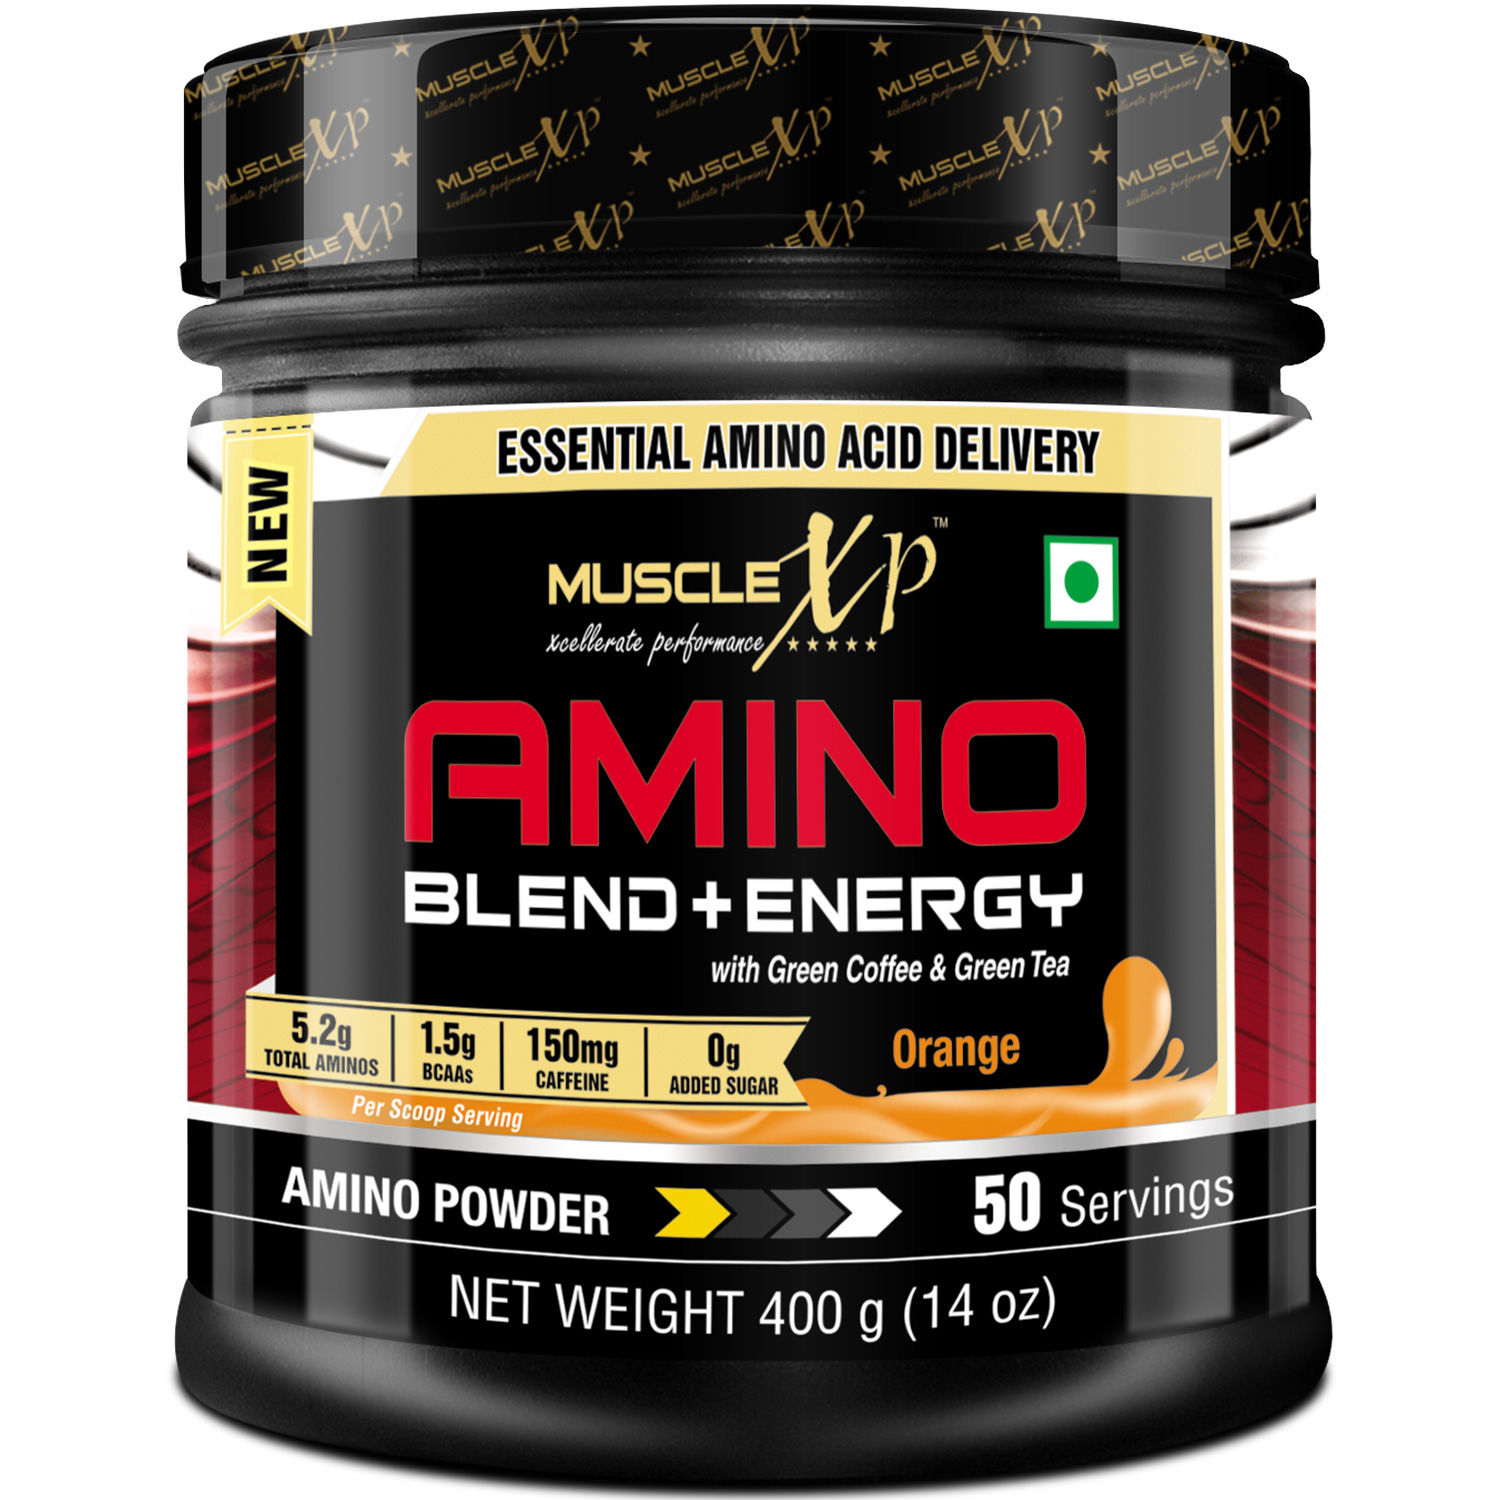 Buy MuscleXP Amino Blend and Energy Powder, Orange, 400g, 50 Servings - Pre Workout, Intra Workout, Energy Blend with Green Coffee, Green Tea - Purplle